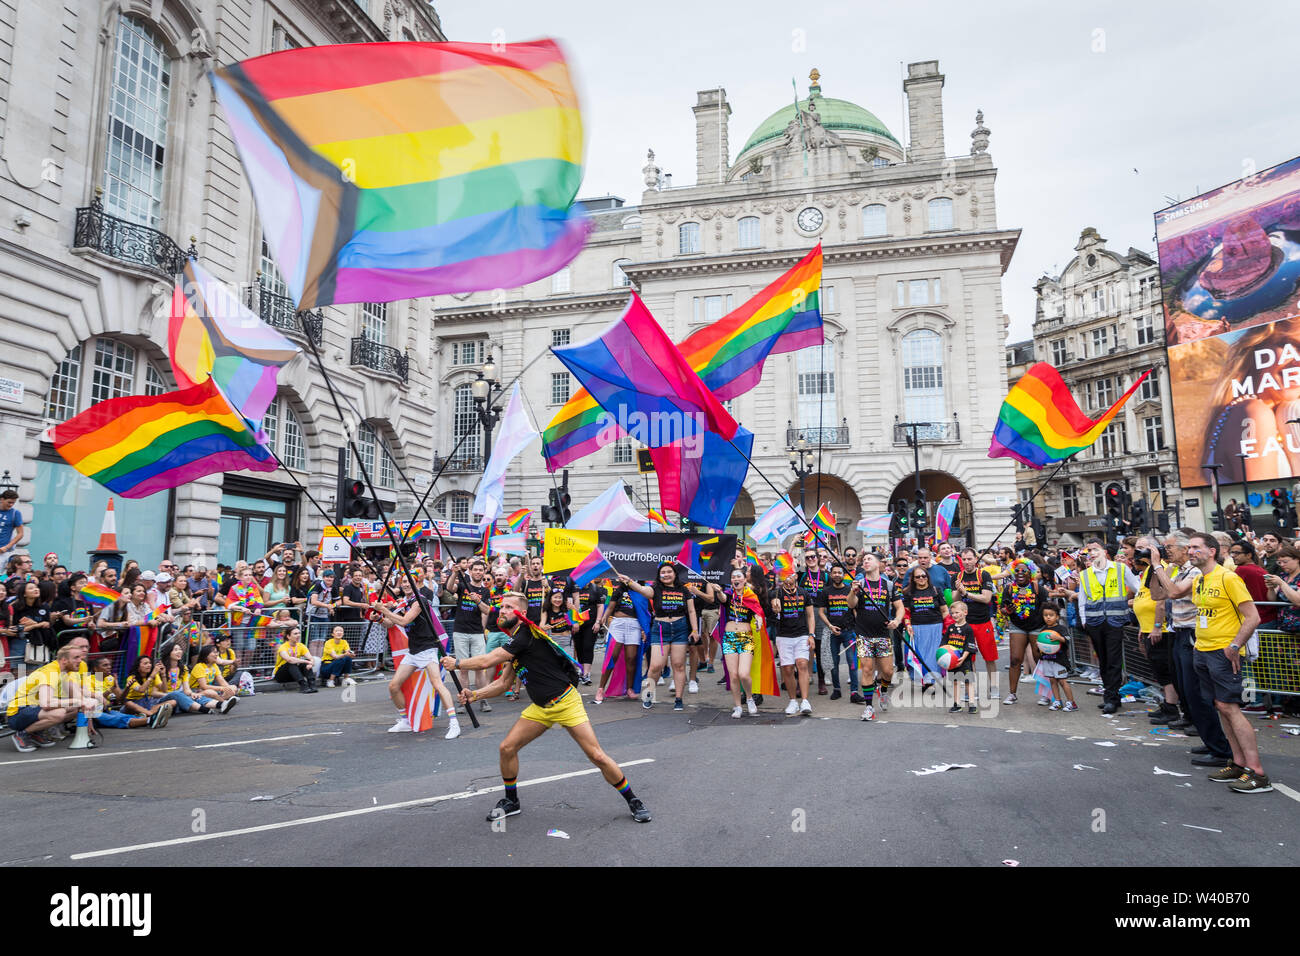 Revellers waving giant LGBT flags in Piccadilly Circus during the Pride par...